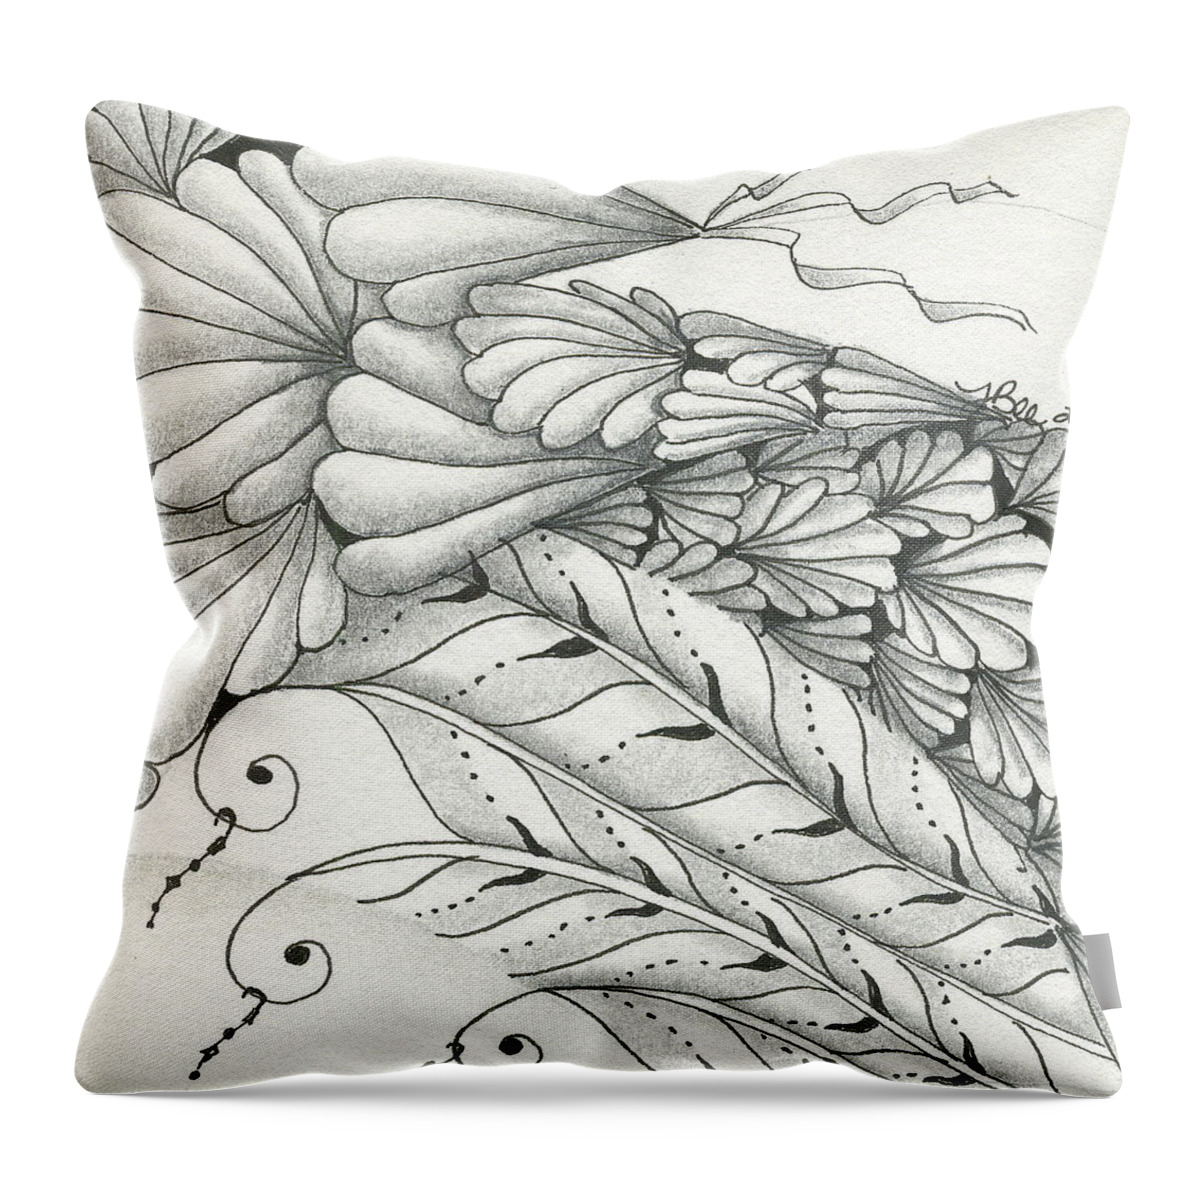 Finery Throw Pillow featuring the drawing Finery by Jan Steinle